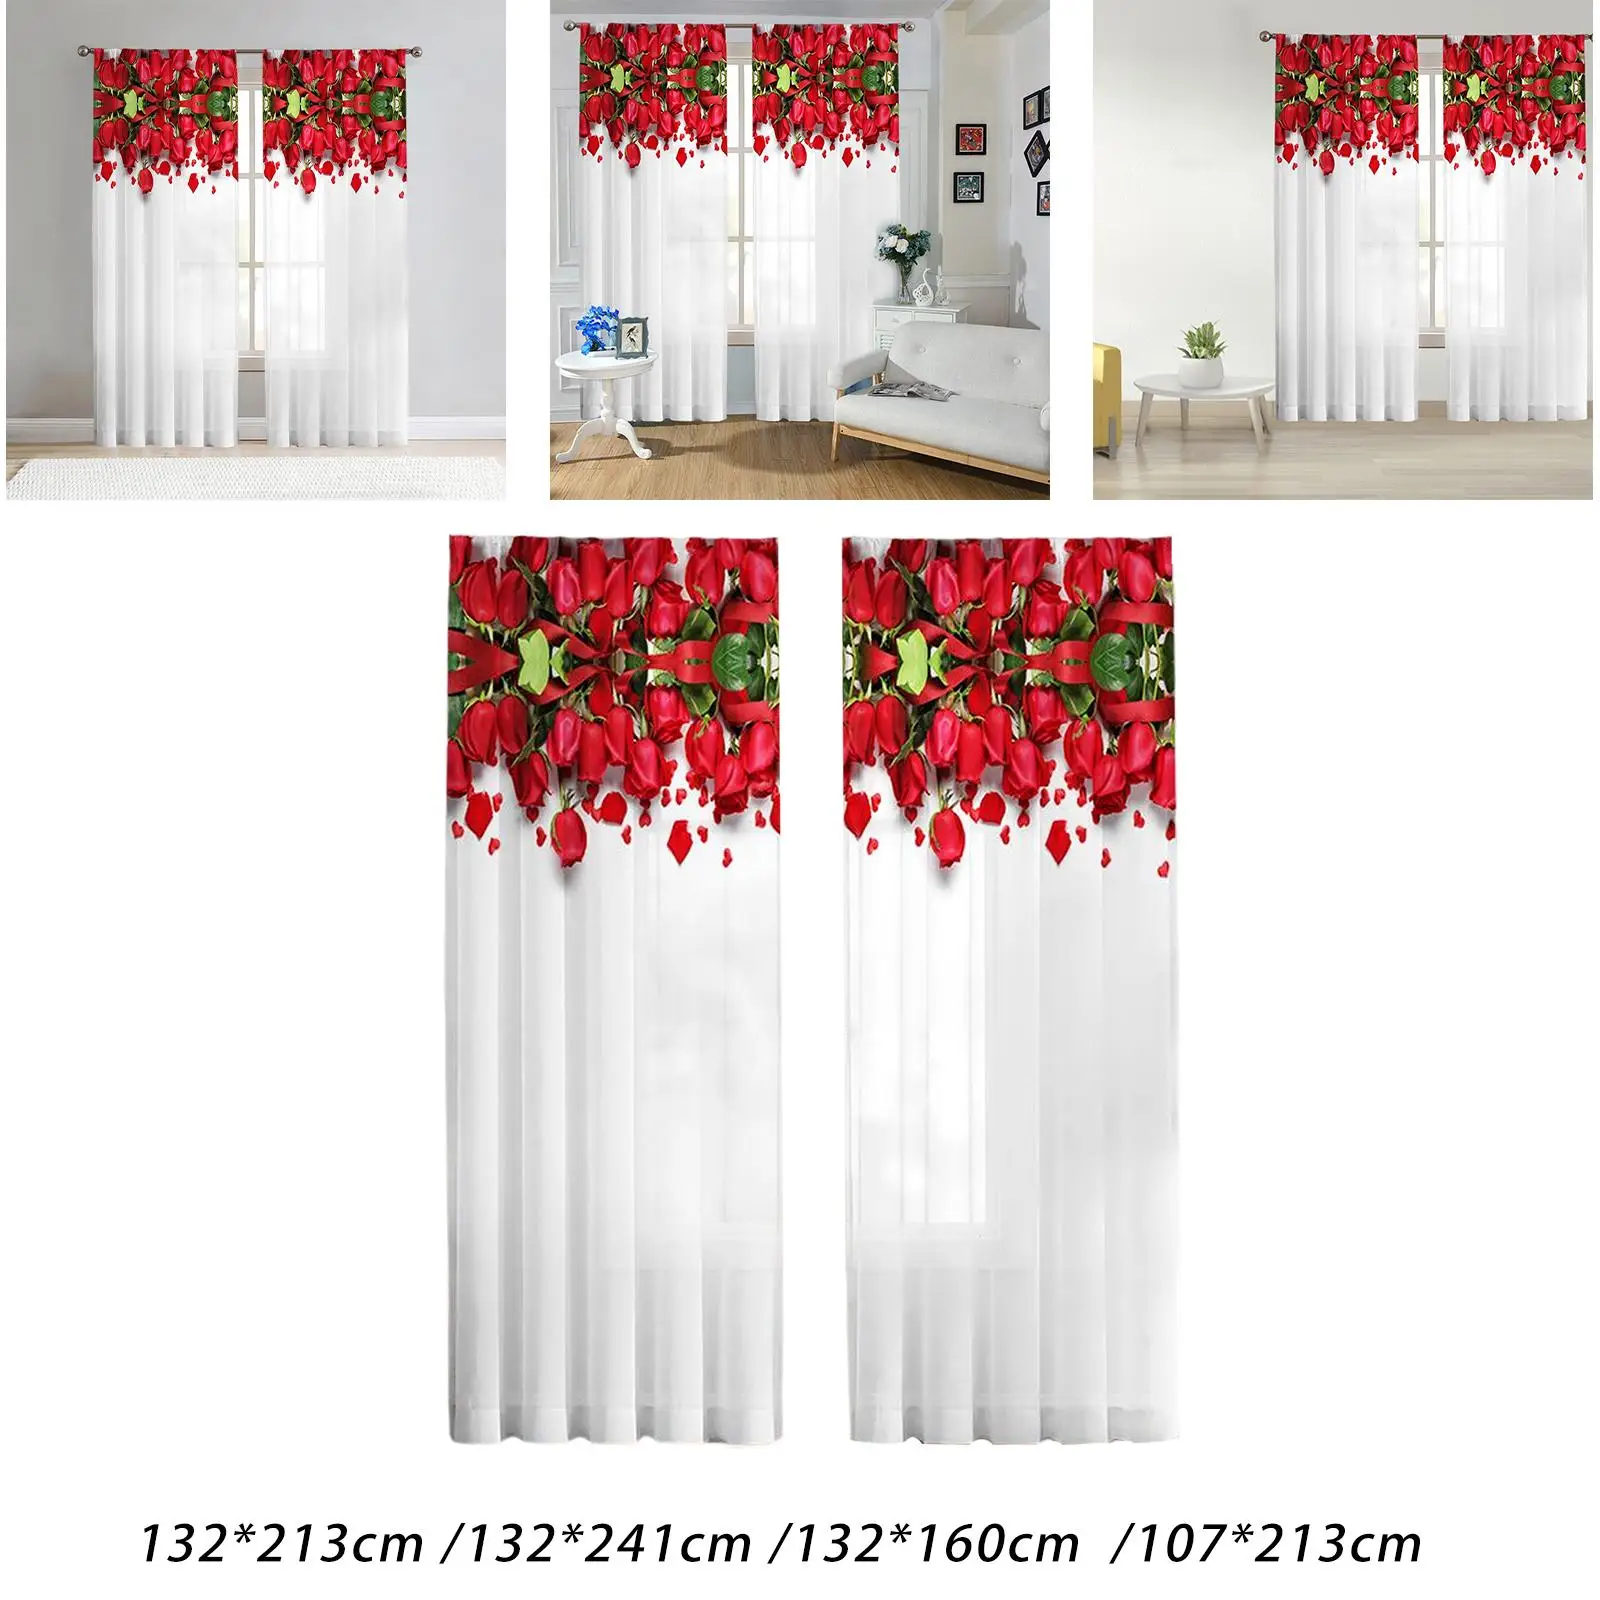 2Pcs Spring Flower Curtains , Rod Pocket Window Curtain Drapes for Bedroom Living Room